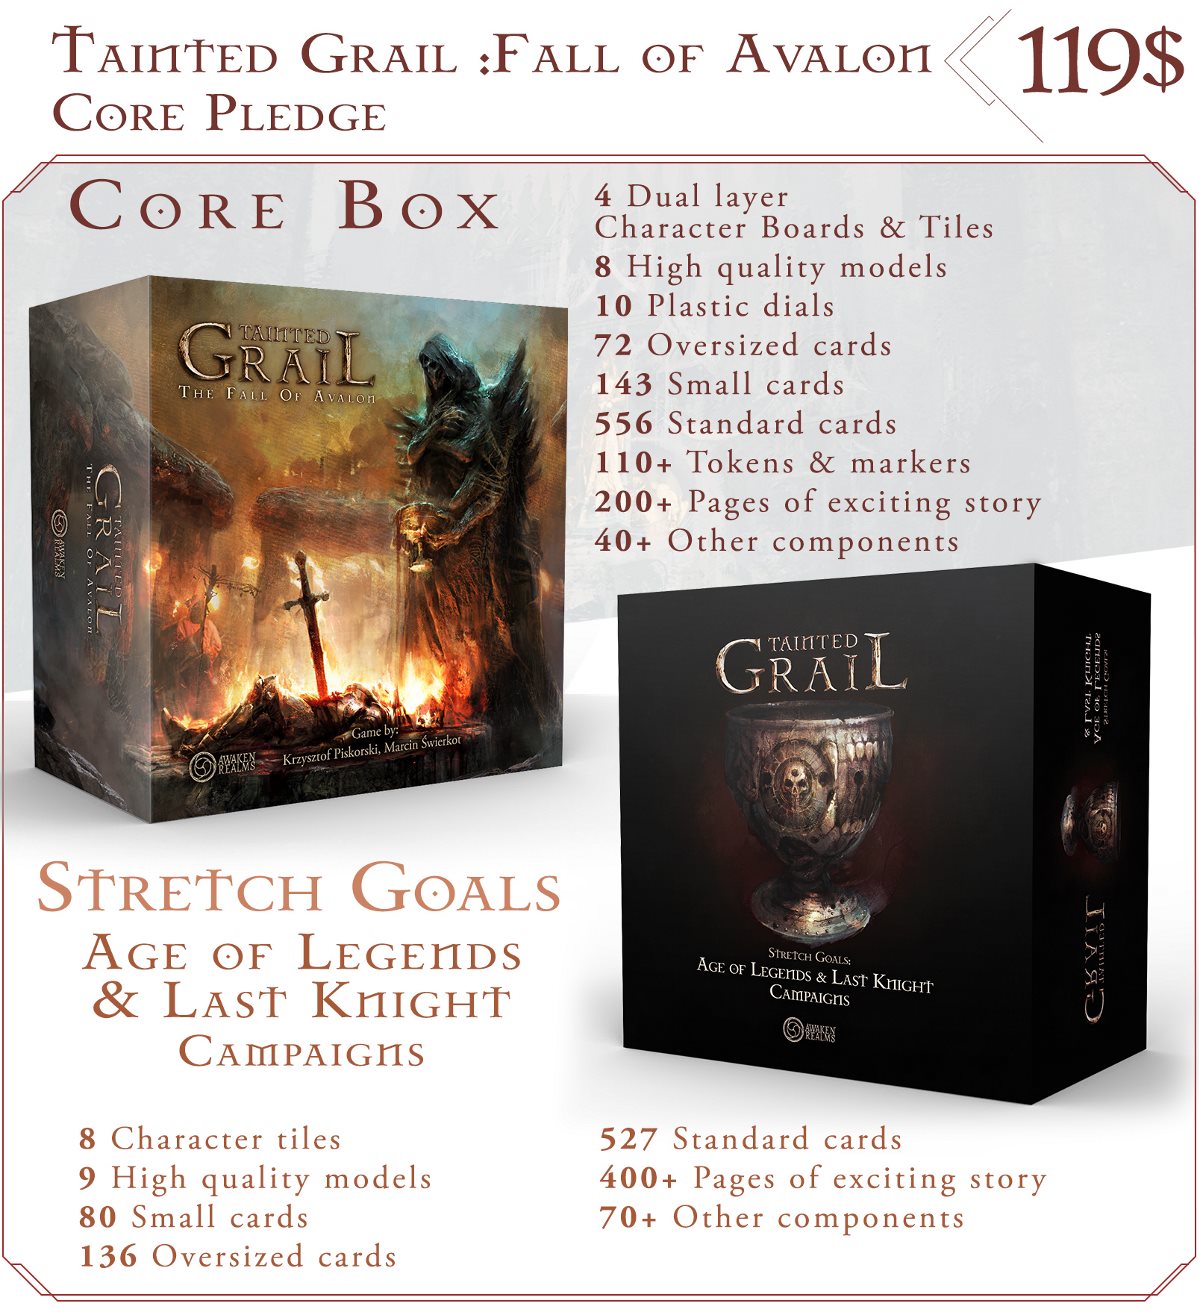 Tainted Grail Fall of Avalon Core Pledge